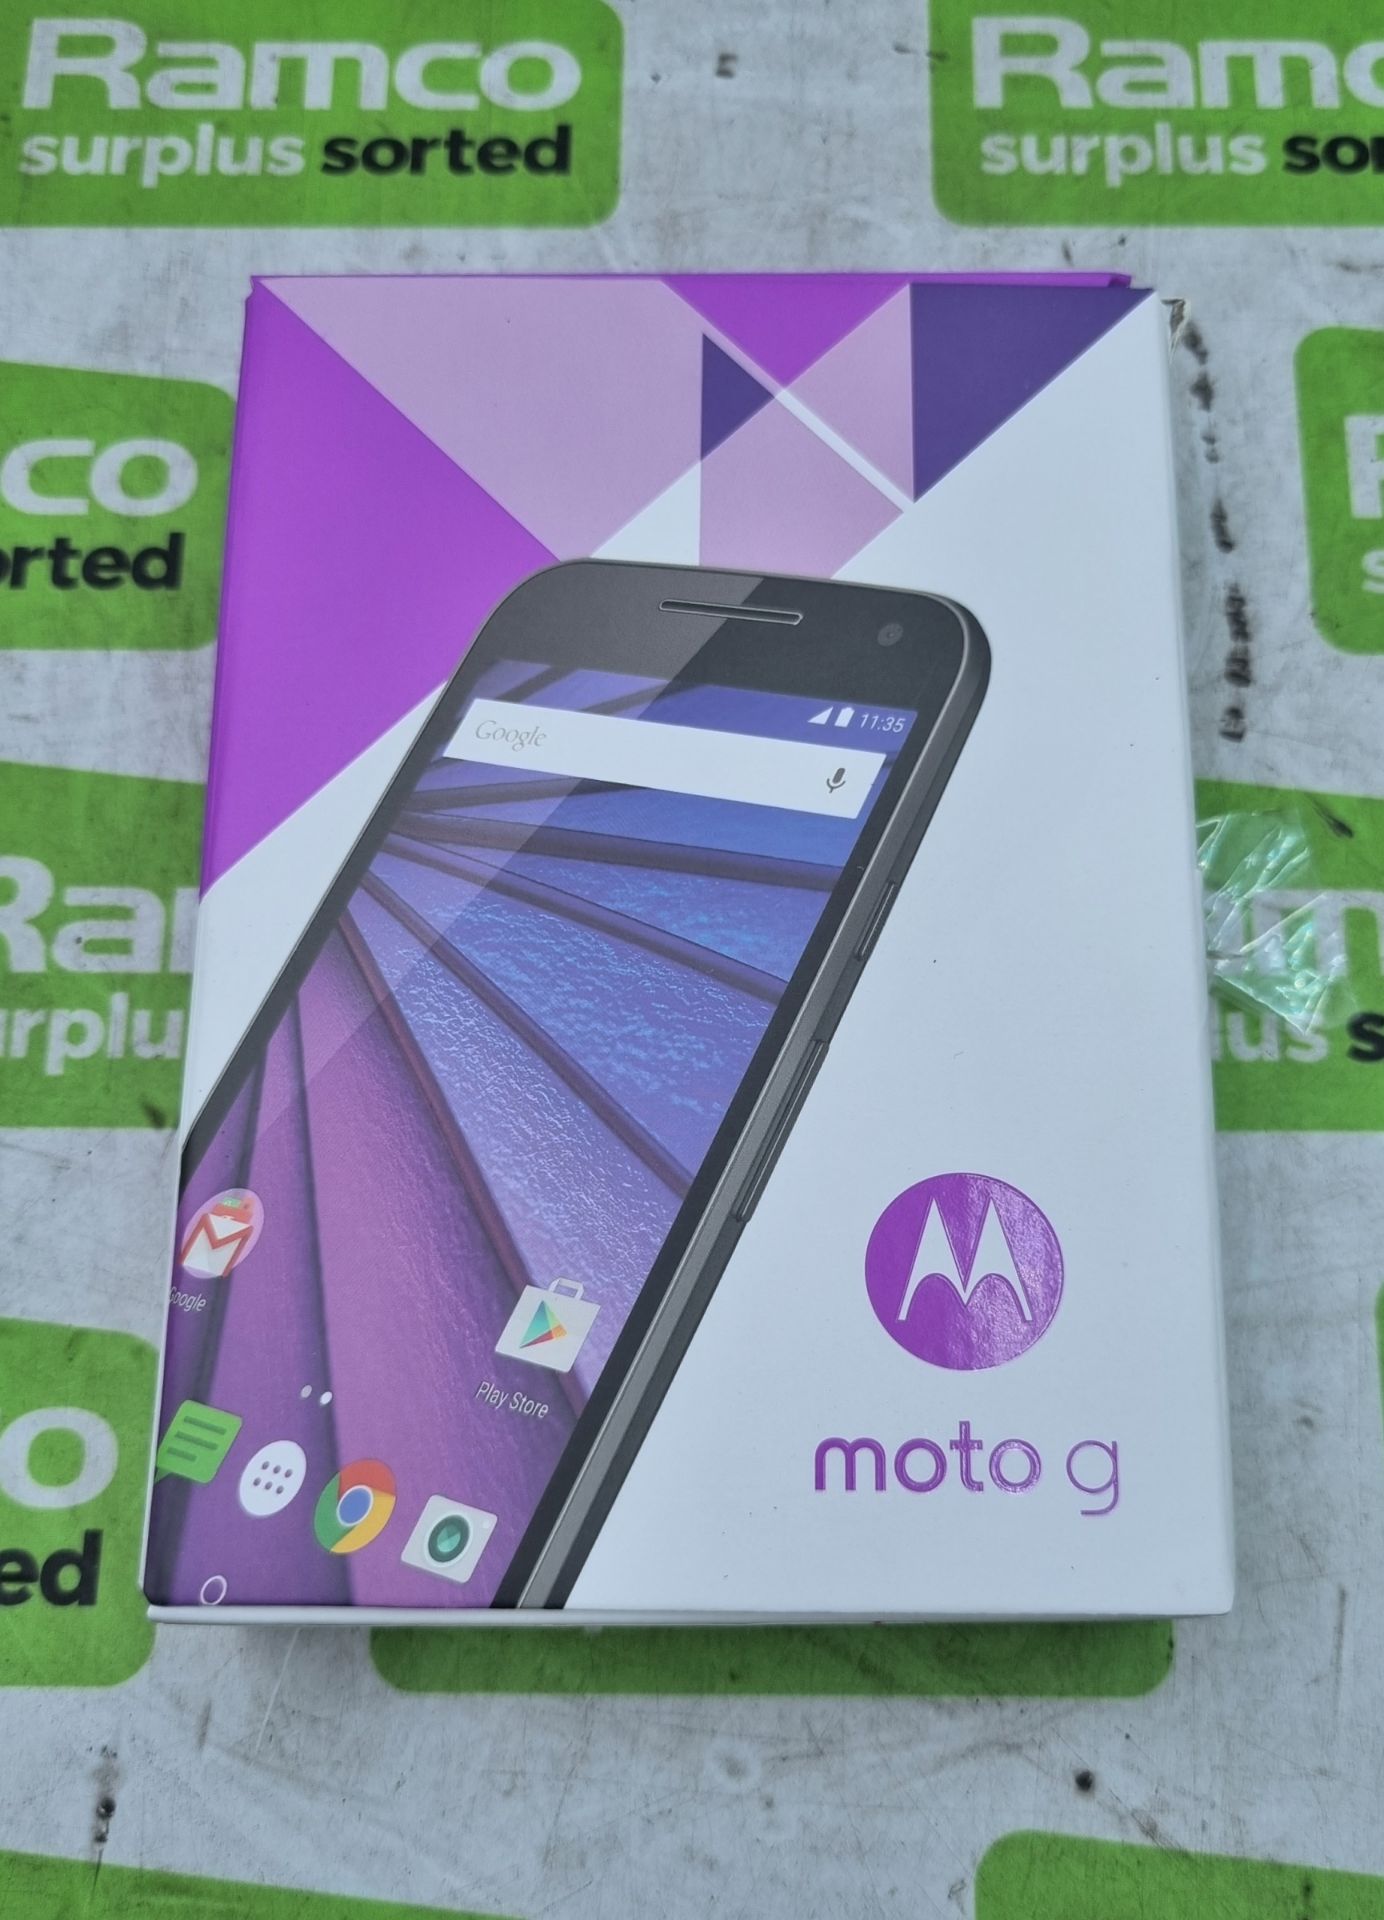 20x Motorola Moto G 3rd Gen - Pay As You Go Mobile Phone - Image 2 of 4